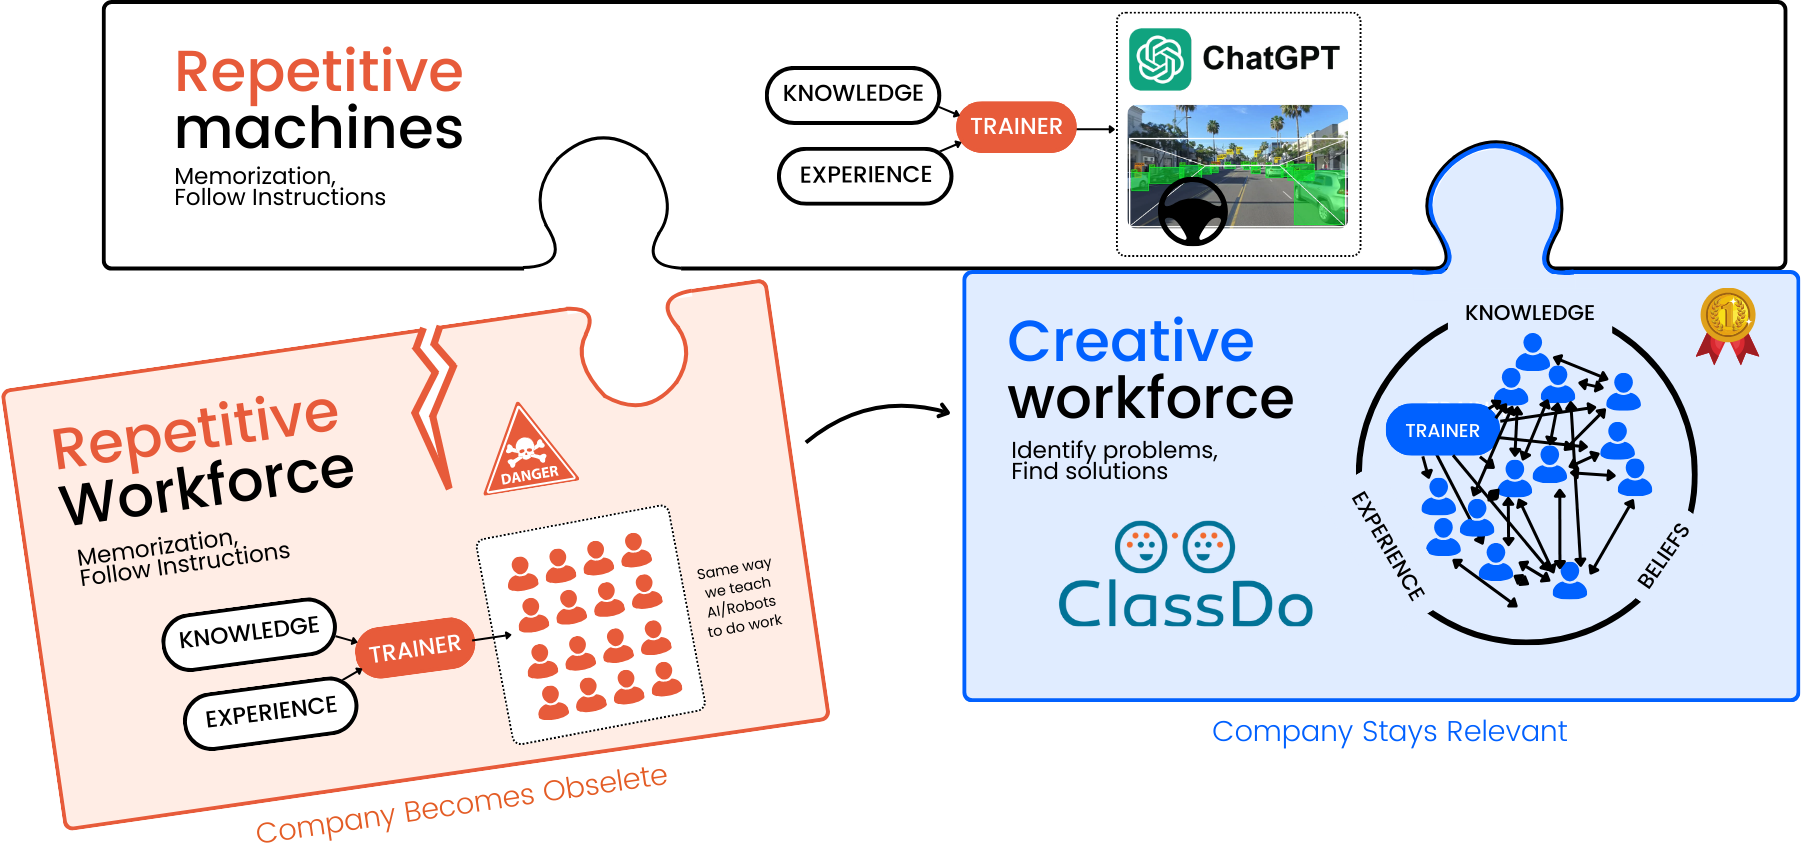 With repetitive machines, repetitive workforce must transition to creative workforce diagram